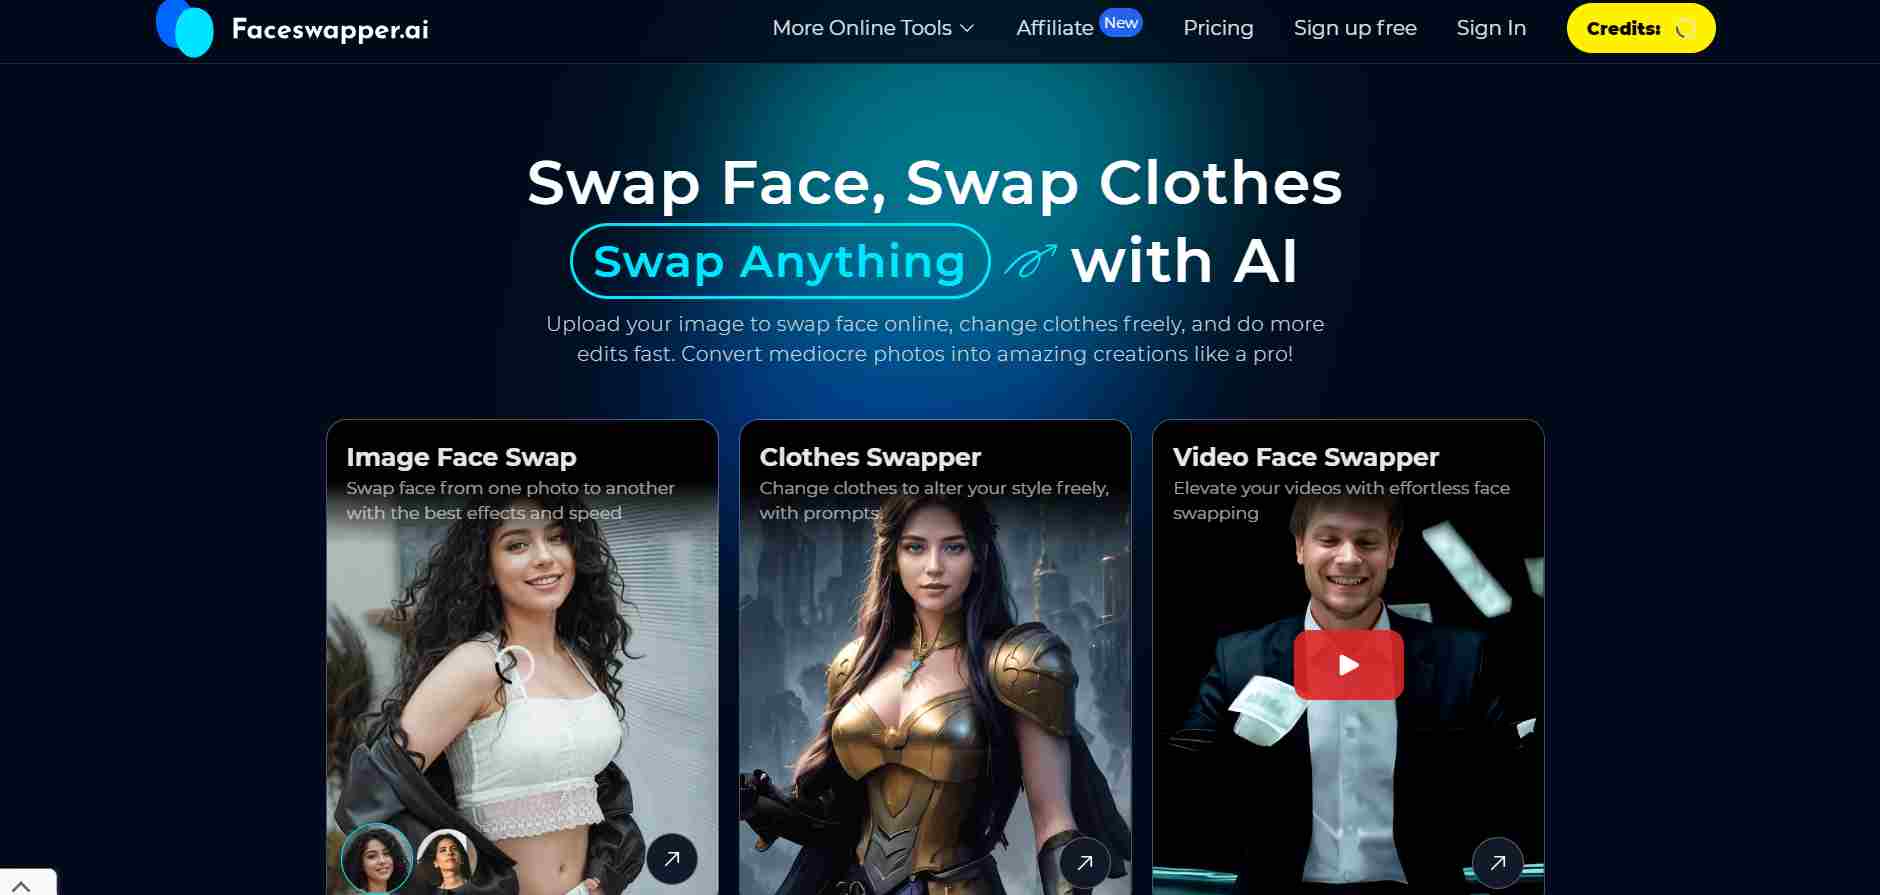 faceswapper-ai-homepage